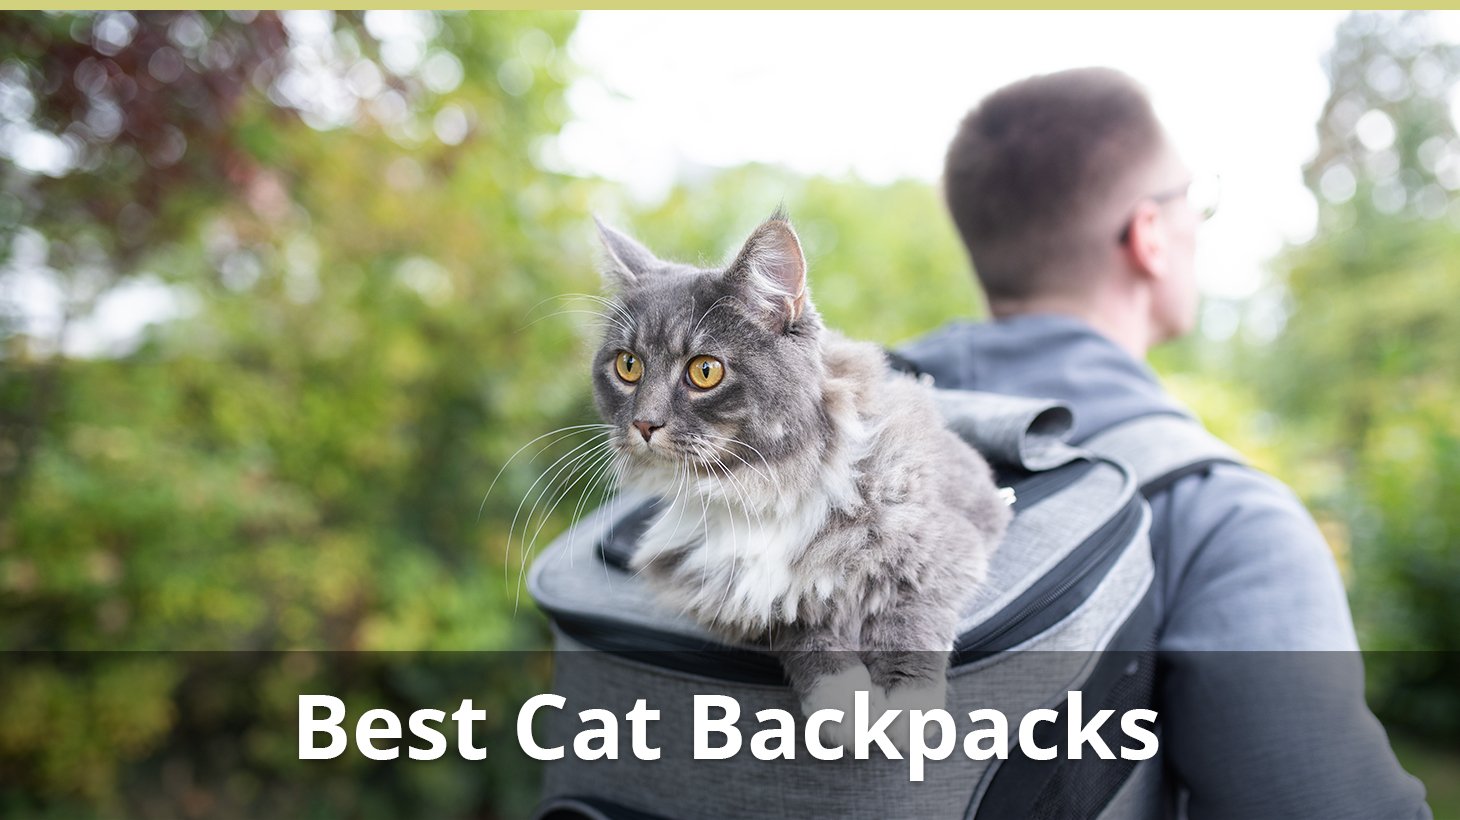 Best Cat Backpacks Article Title Image